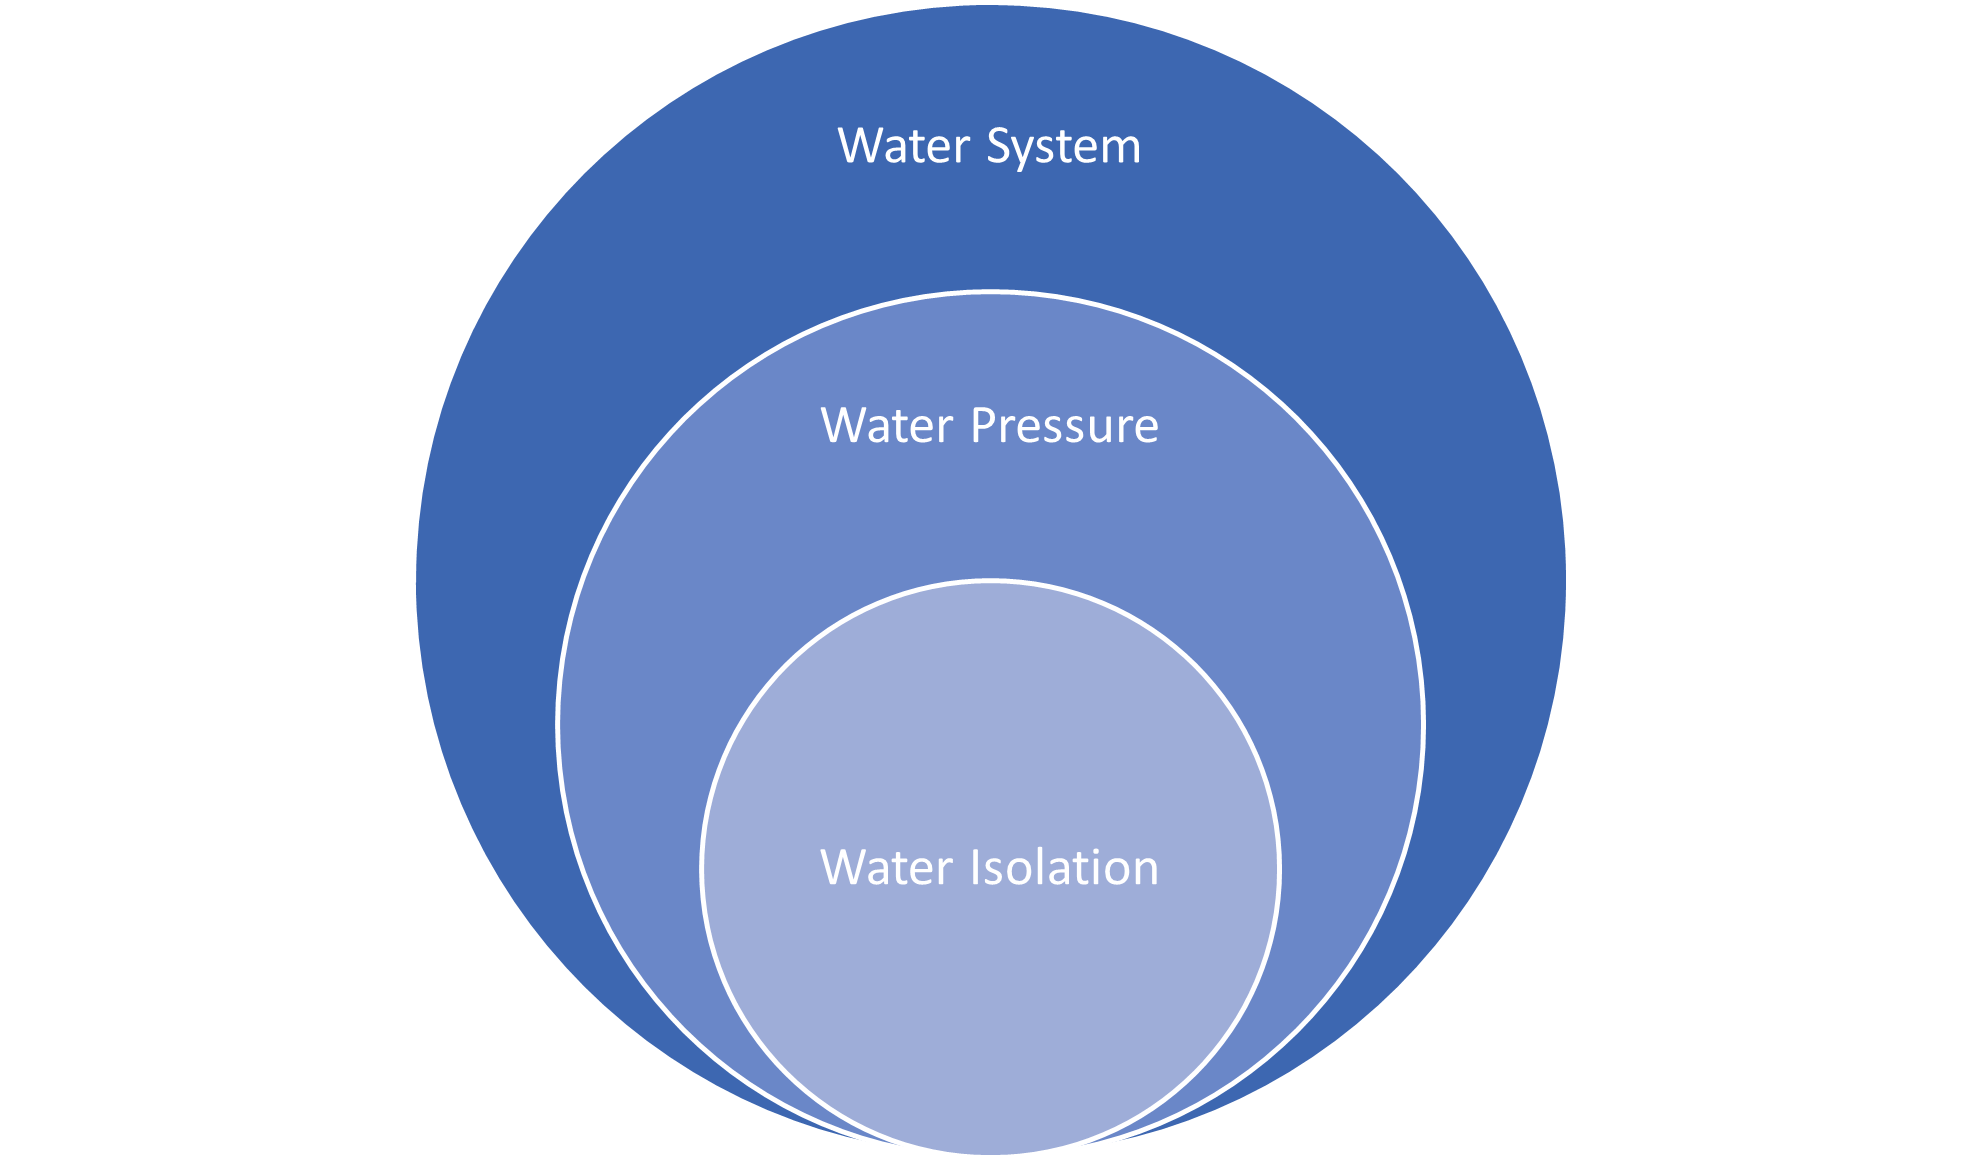 Extension of the water distribution network in subnormal regions